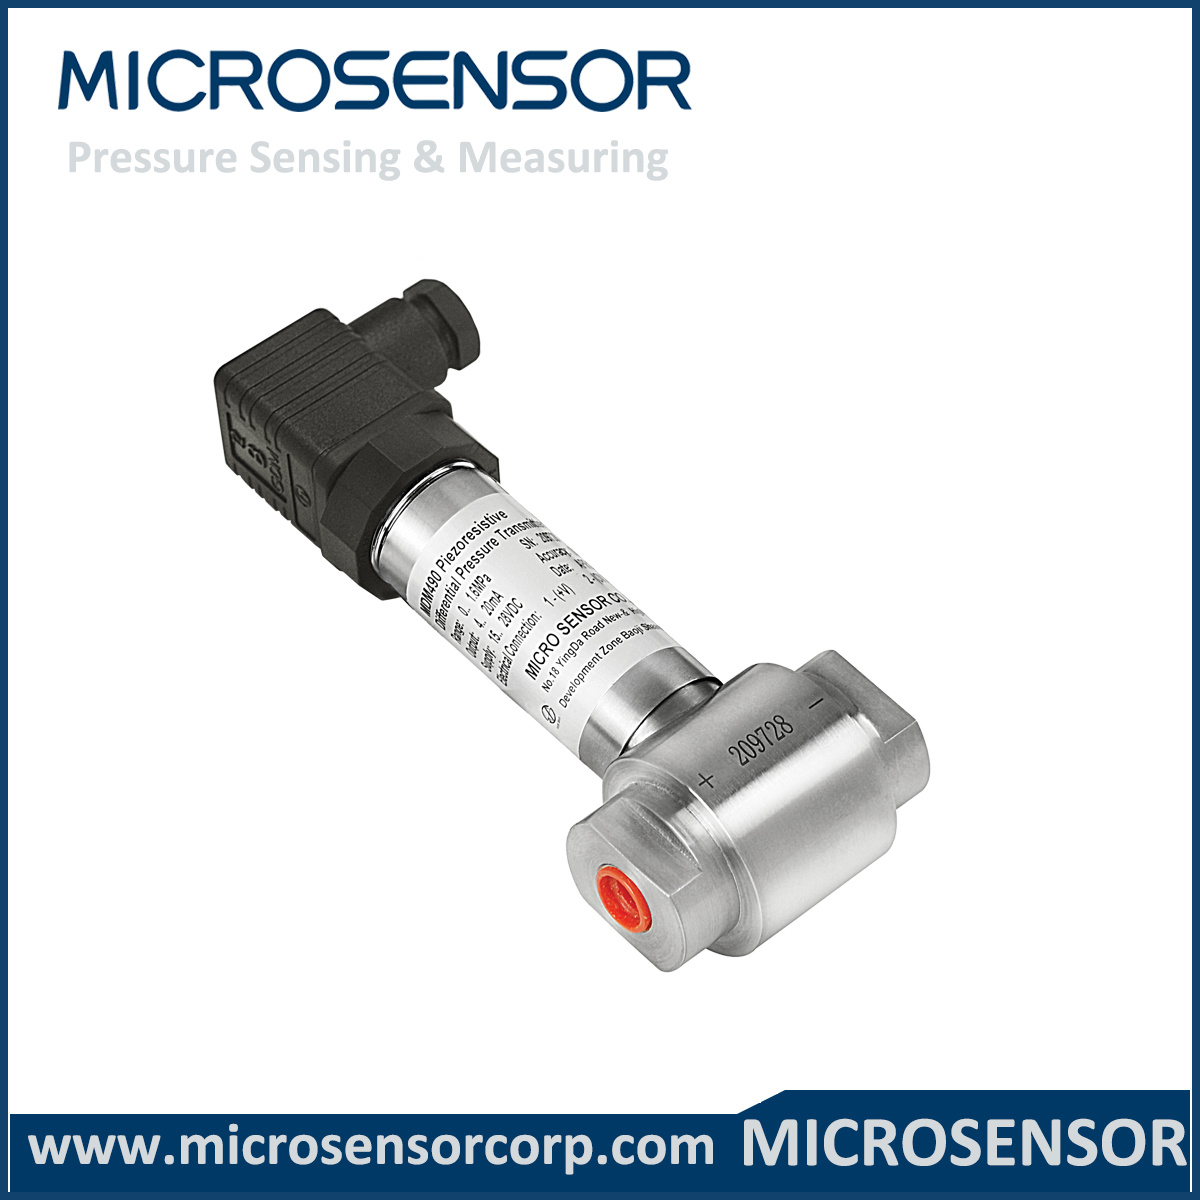 Oil Differential Pressure Transmitter with Good Accuracy (MDM490)